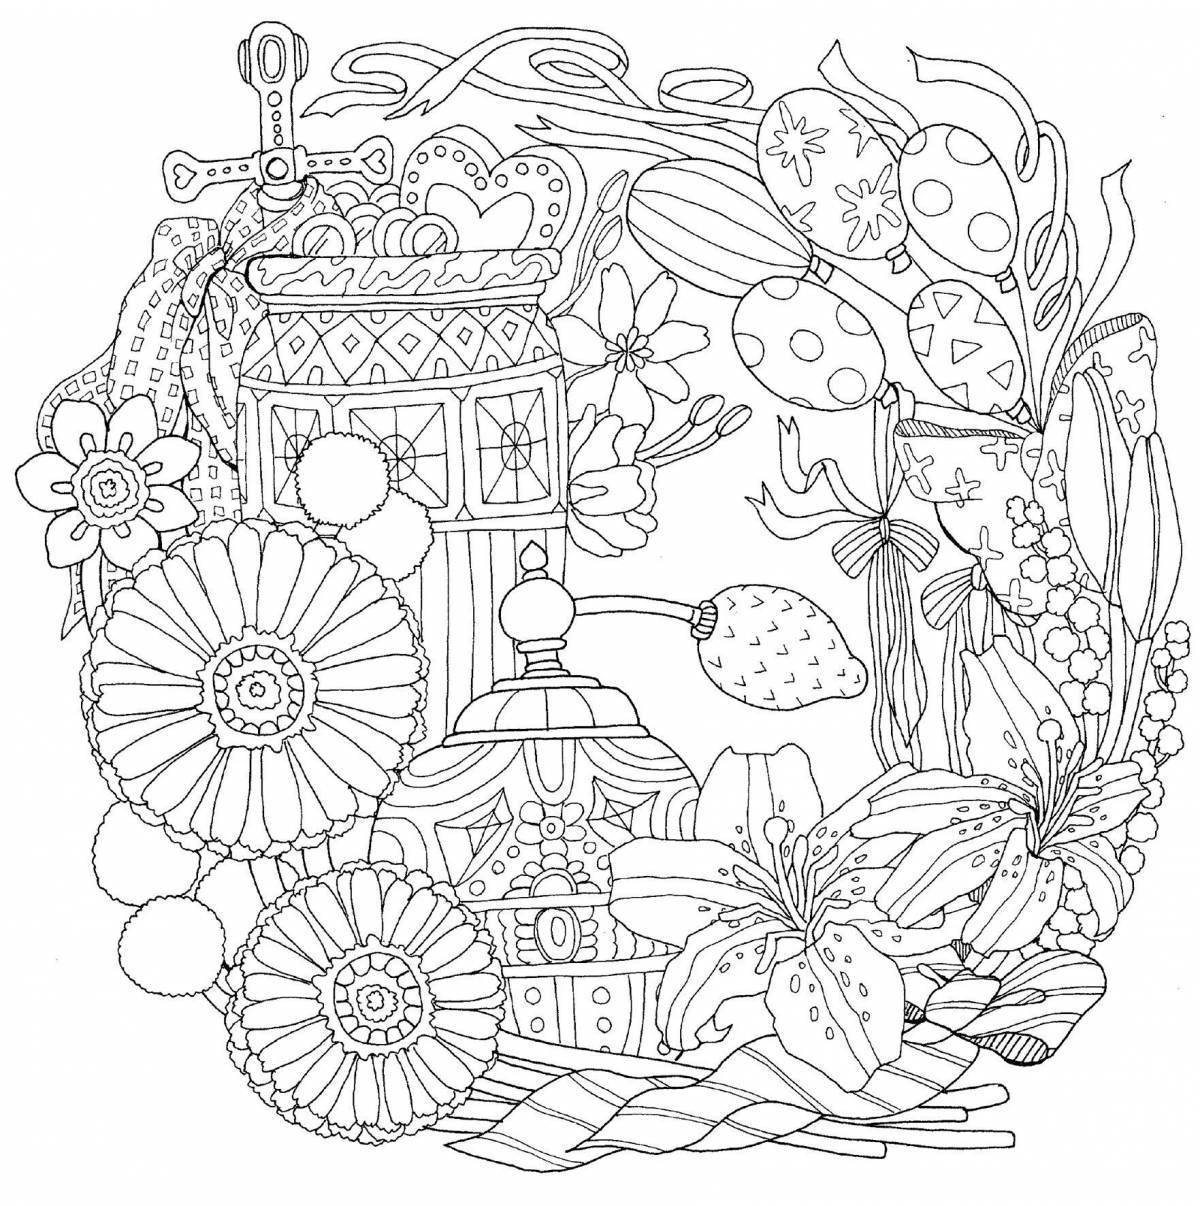 Comforting anti-stress coloring book for adults